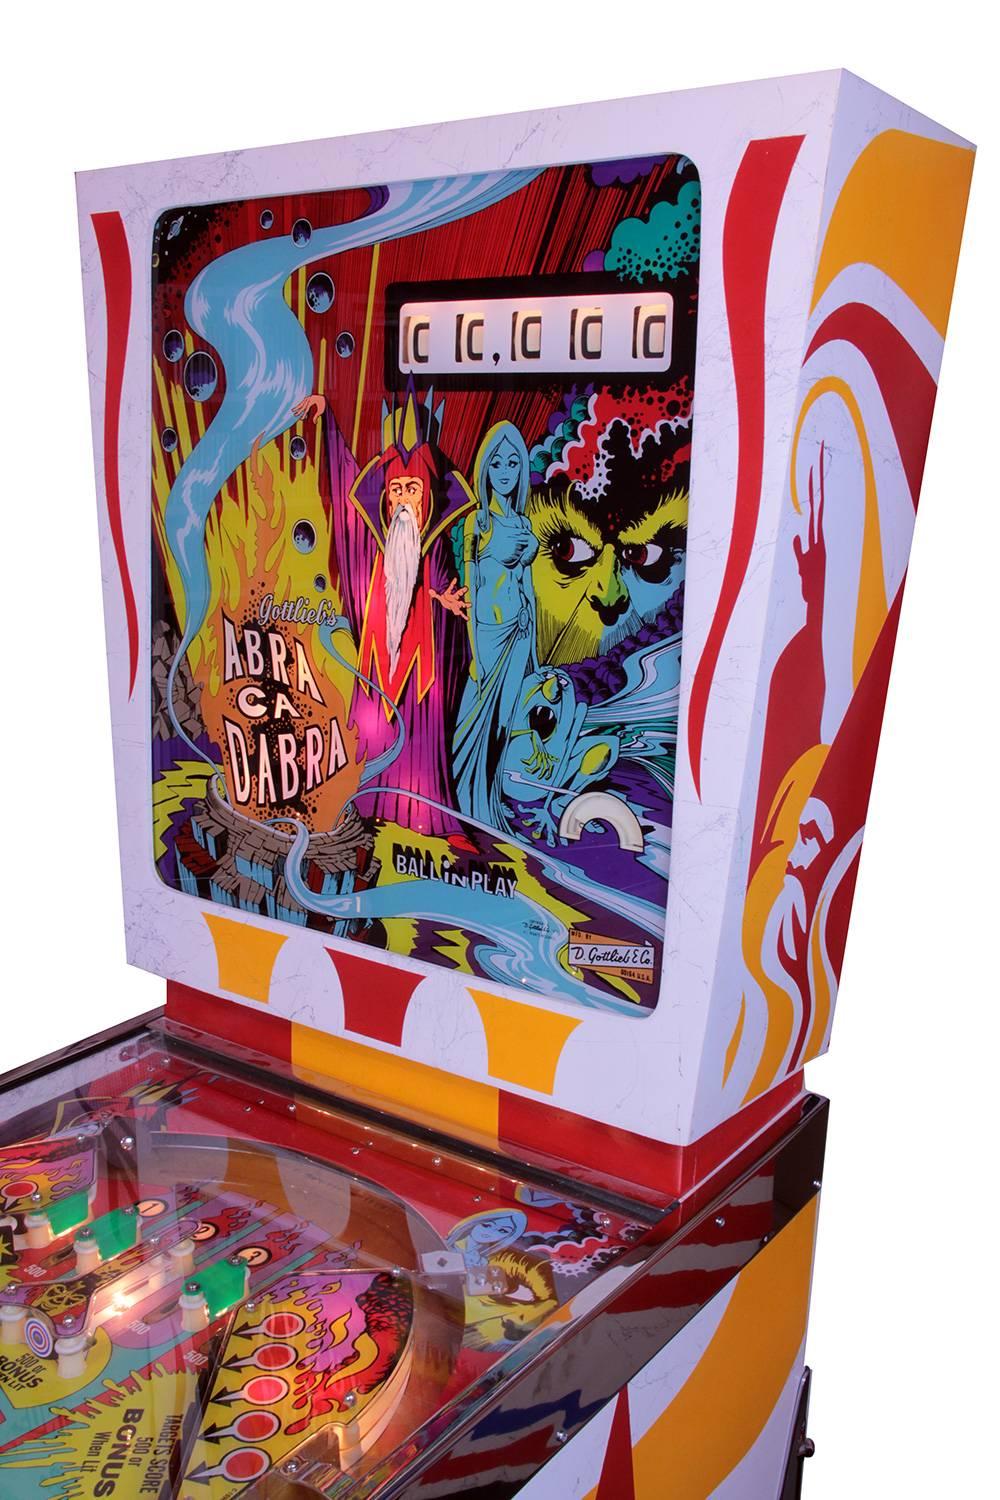 This game took 13 months to restore and was a complete wreck. It has a fully refurbished cabinet painted to original colours and pattern, a new reproduction back glass on glass a totally hand repainted play field which has been lacquered at least a